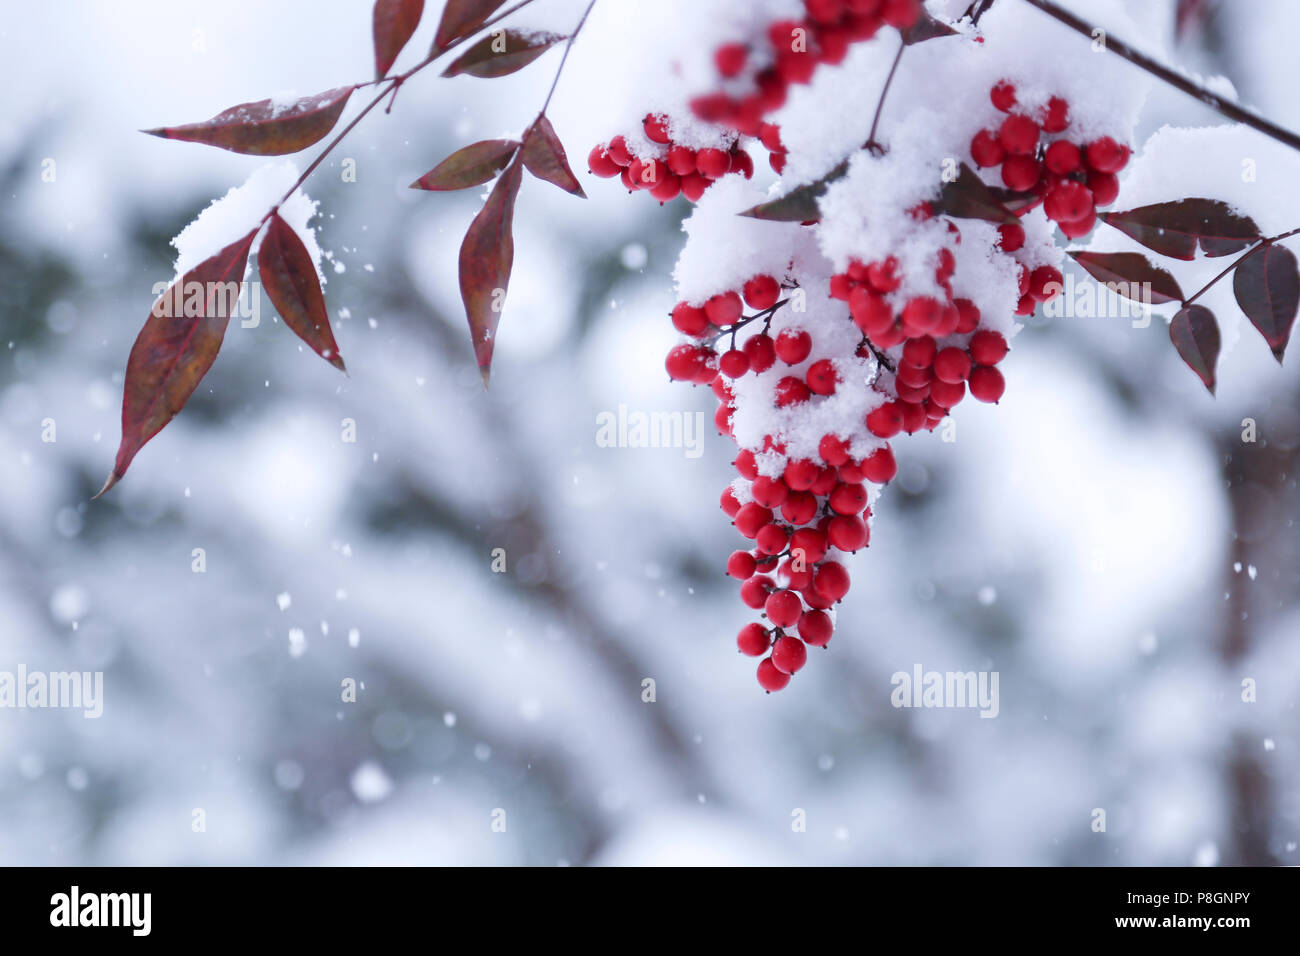 Red berries in white snow on a cold winter day. Stock Photo